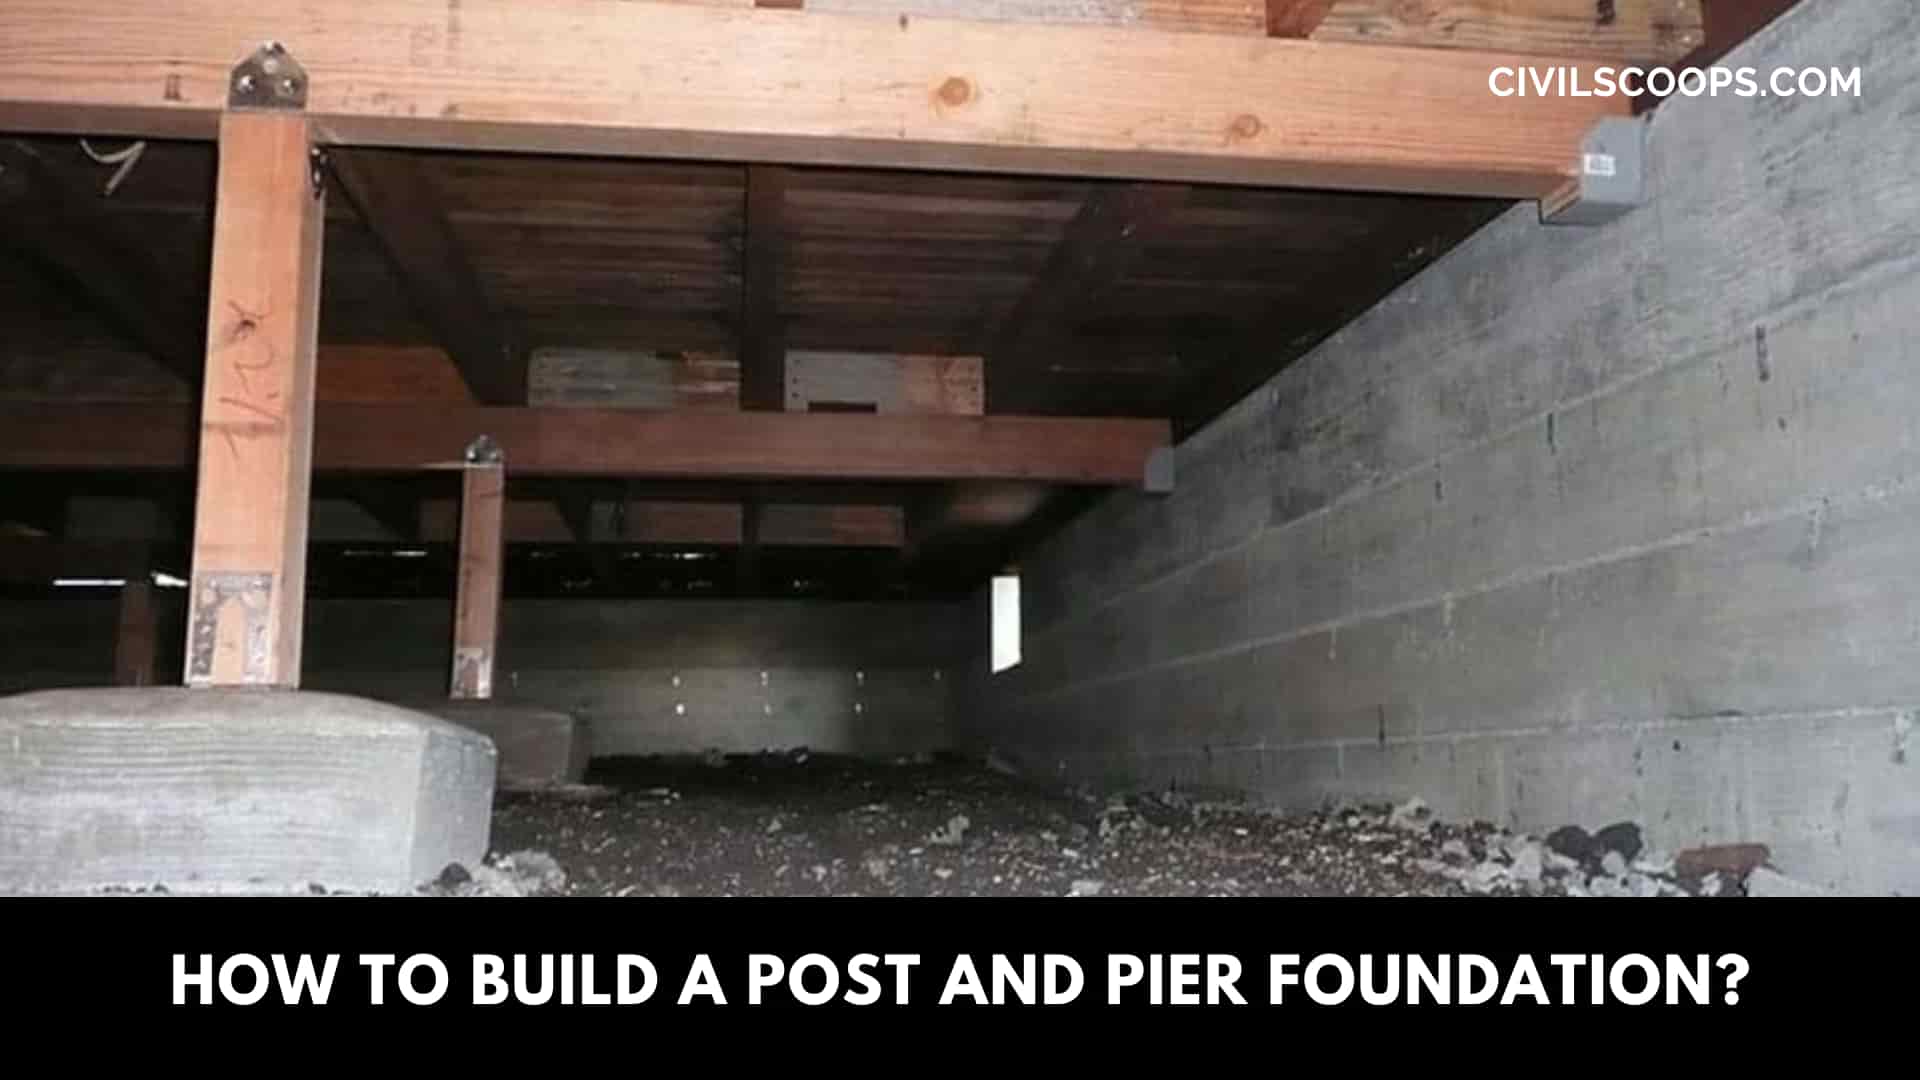 How to Build a Post and Pier Foundation?